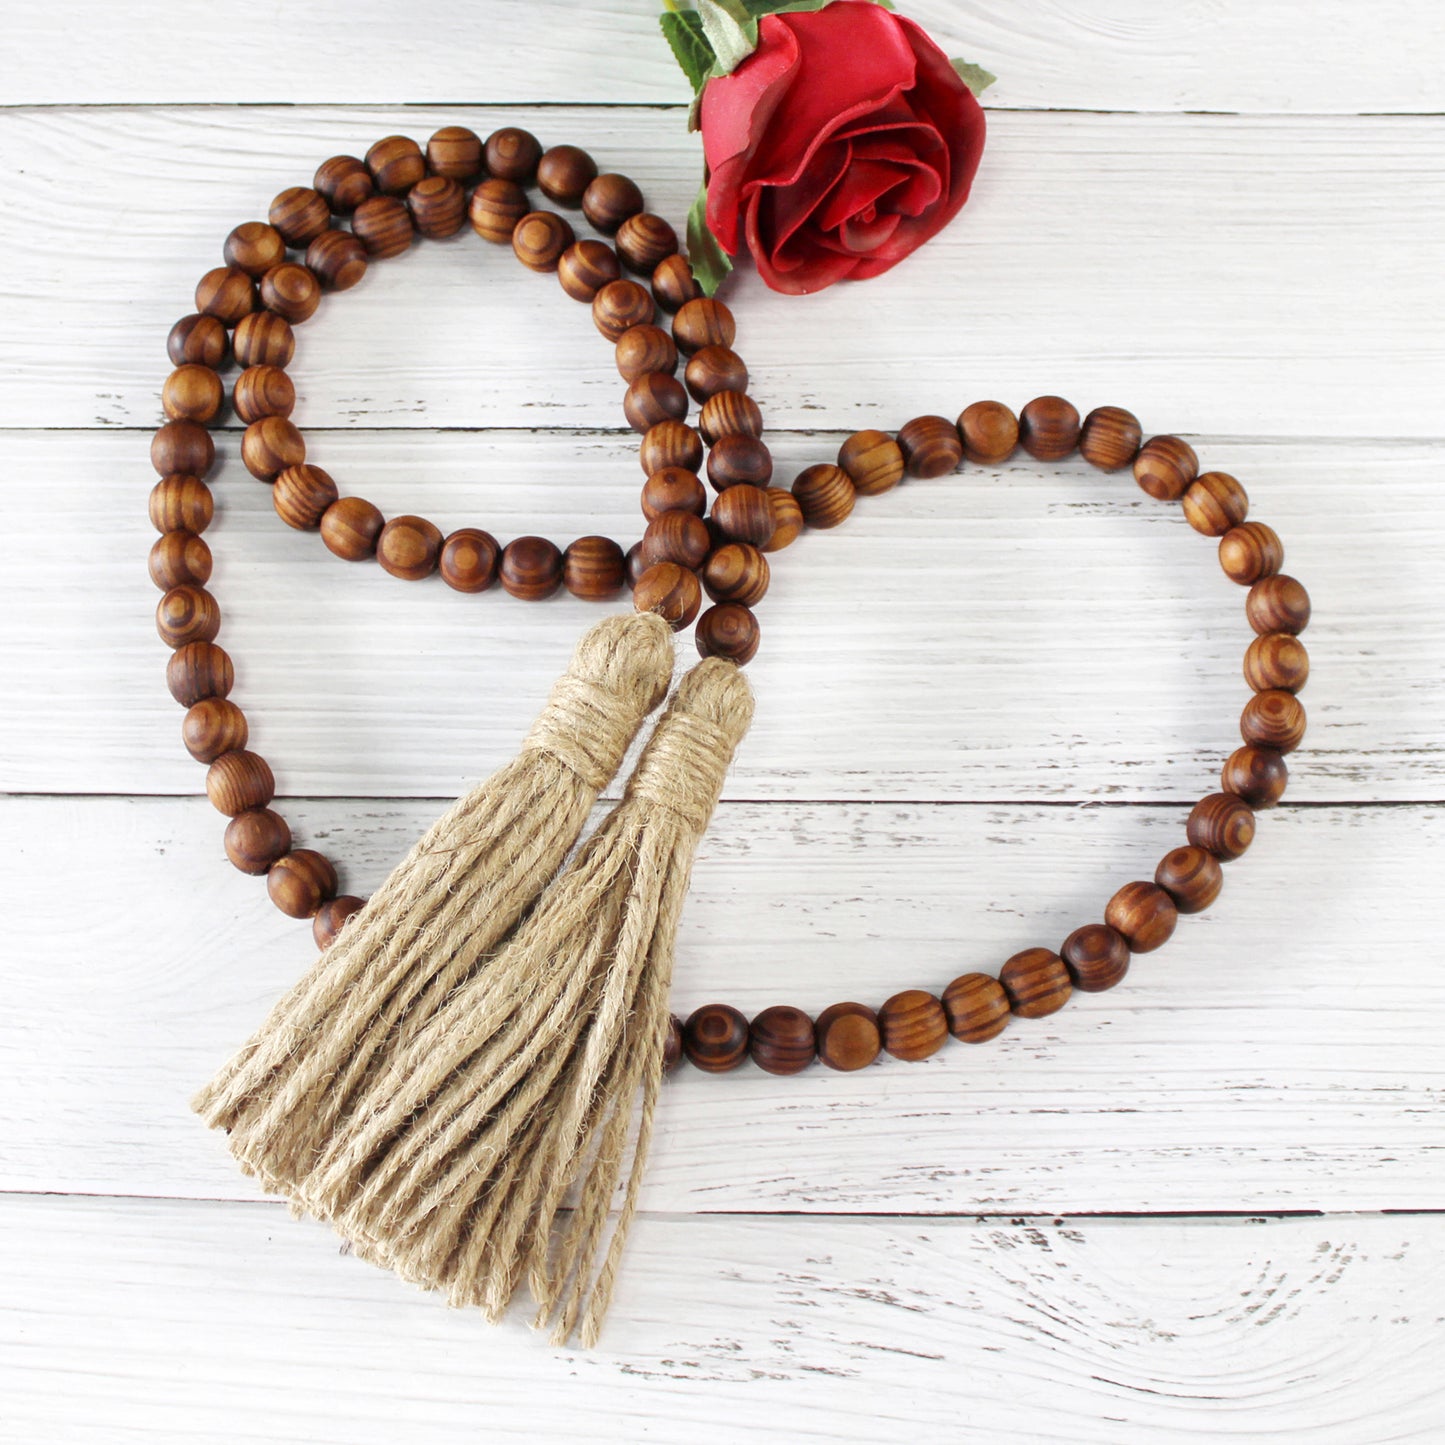 CVHOMEDECO. Wood Grain Beads Garland with Tassels Farmhouse Rustic Wooden Prayer Bead String Wall Hanging Accent for Home Festival Decor. Dark Brown